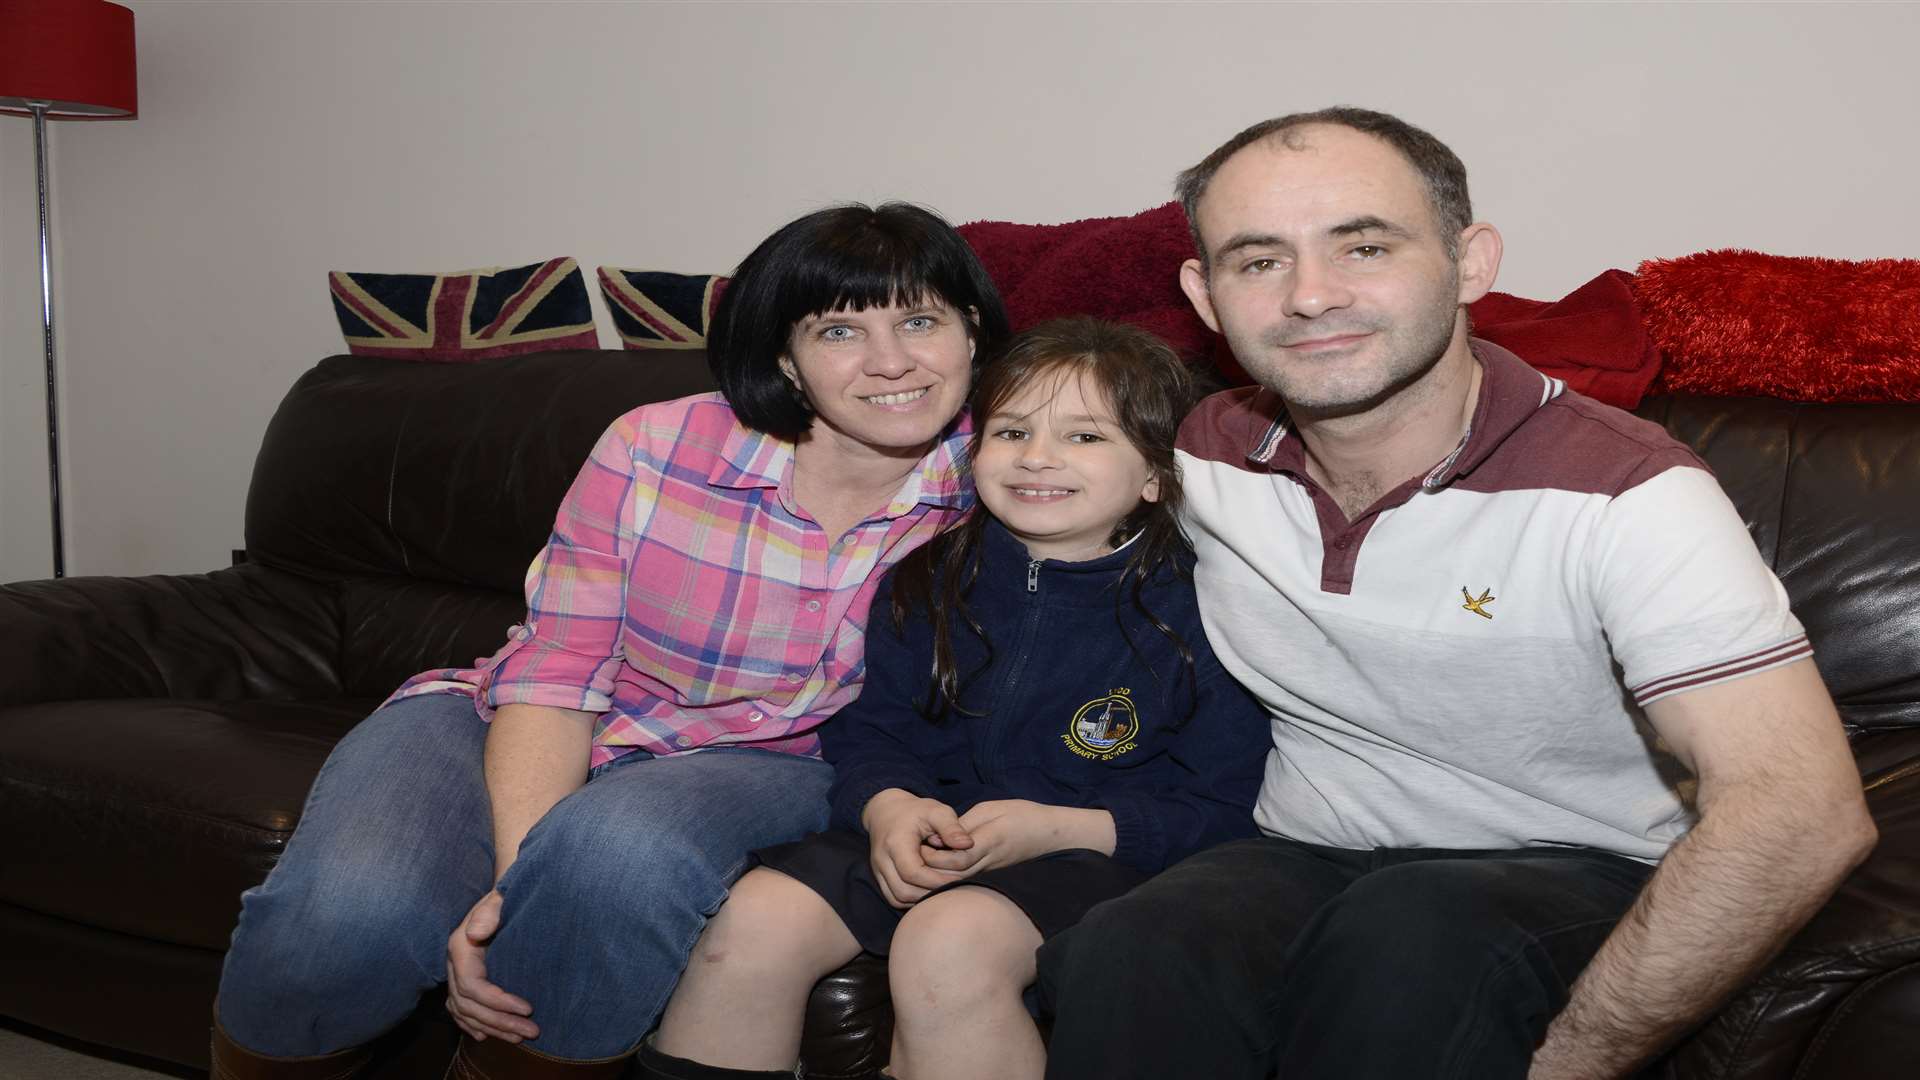 Paul Dennison is appealing to people to donate organs after he received two transplants. Pictured with wife Jo and daughter Grace. Picture: Paul Amos